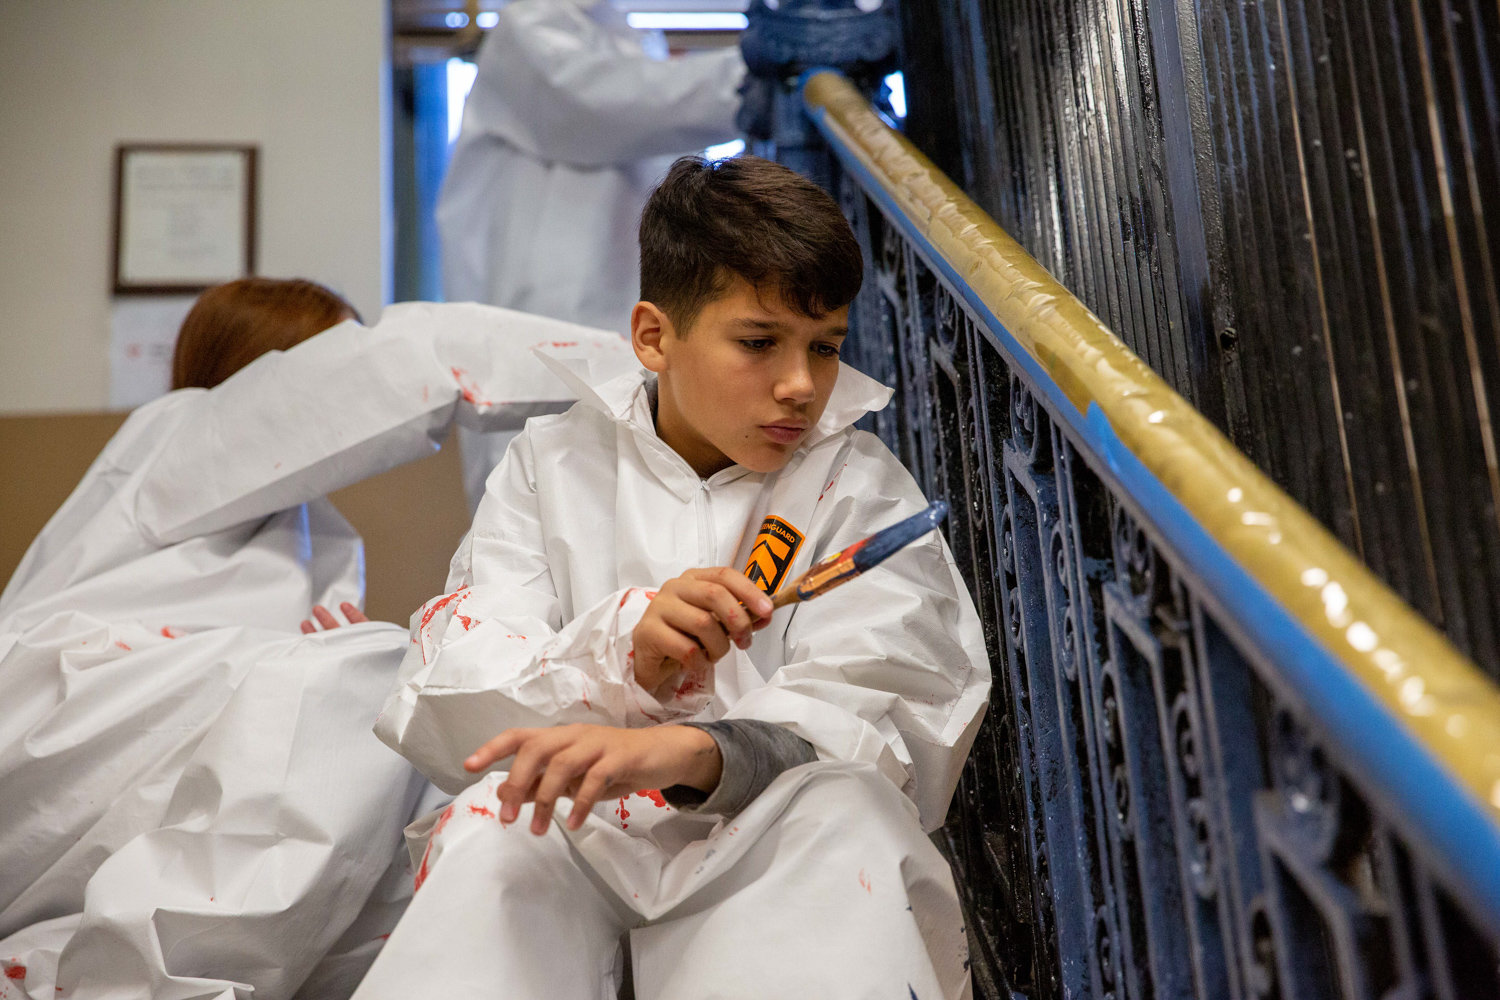 Logan Donato, son of Local Union No. 3 IBEW member Chris Donato, paints a banister inside the Kingsbridge Heights Community Center on Nov. 16. The union teamed up with Rebuilding Together NYC to fix up the center, including repainting, simple rewiring work and moulding replacement.